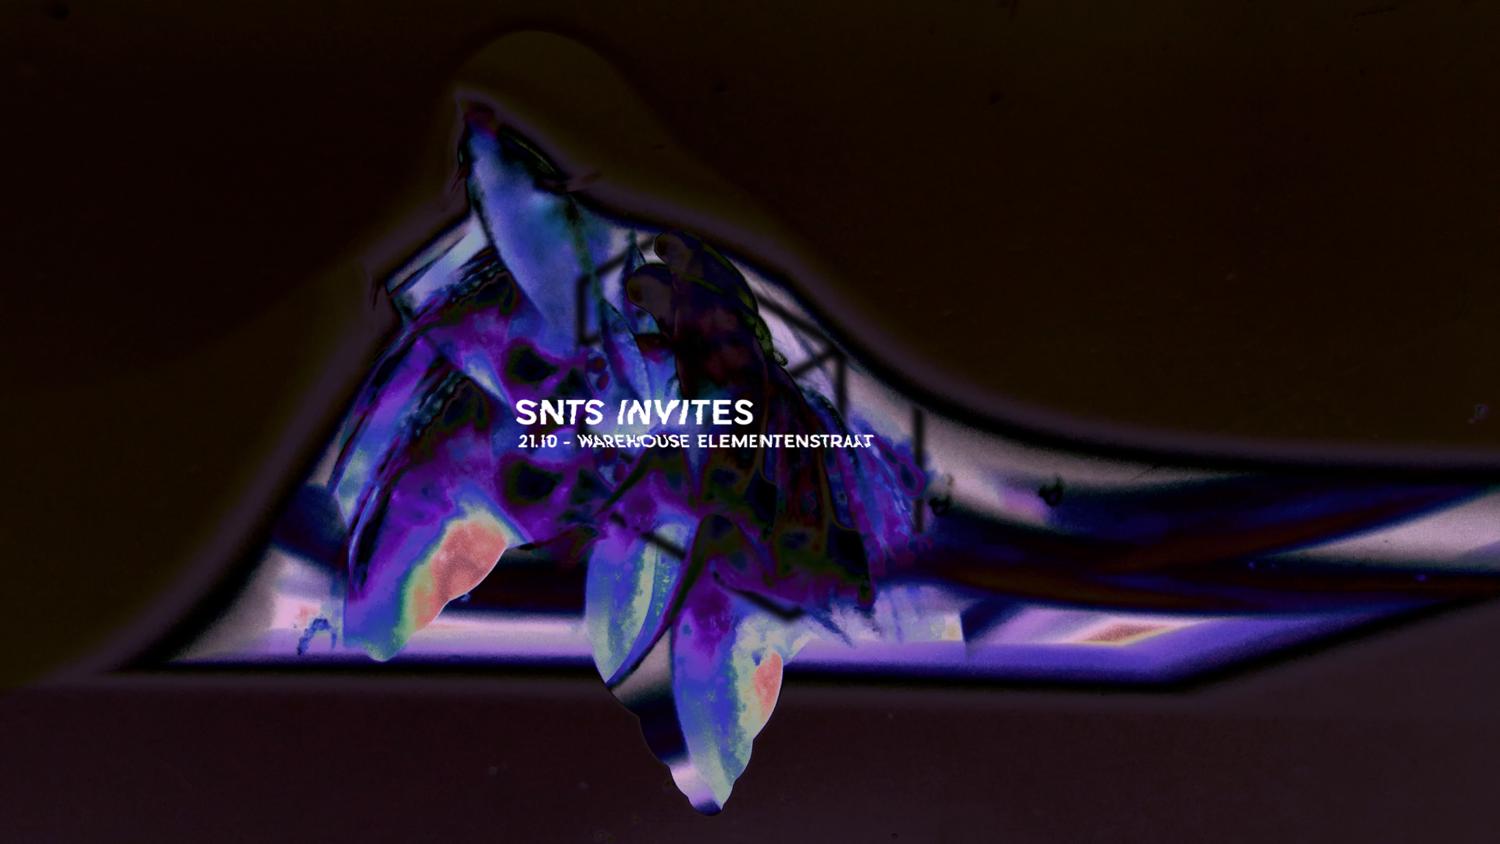 Intercell X Snts Invites - Ade By Day